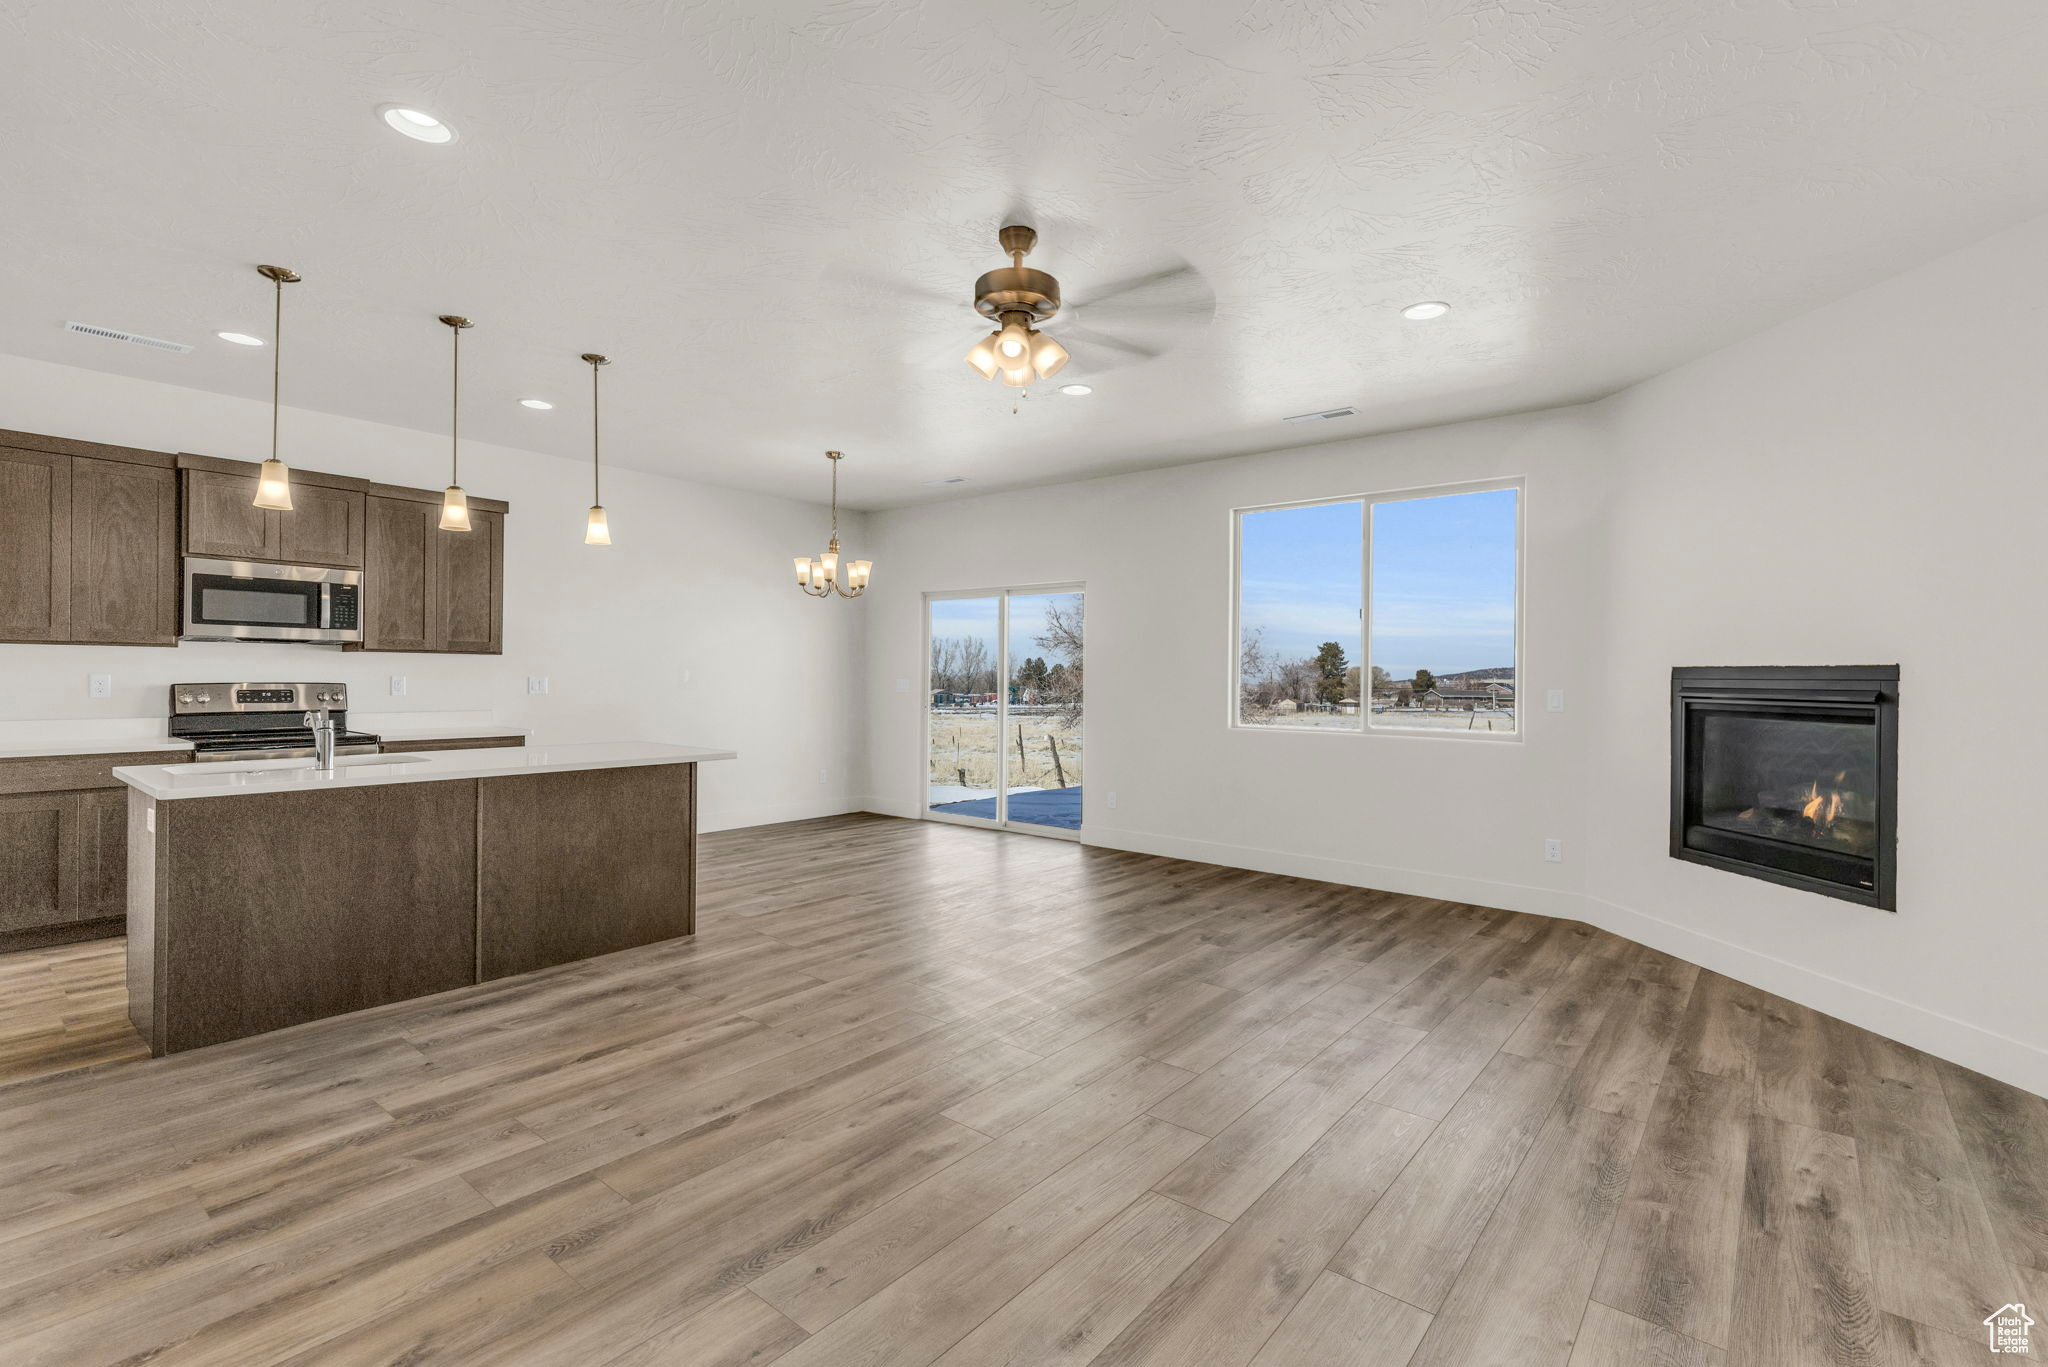 Kitchen featuring pendant lighting, appliances with stainless steel finishes, light hardwood / wood-style floors, and ceiling fan with notable chandelier